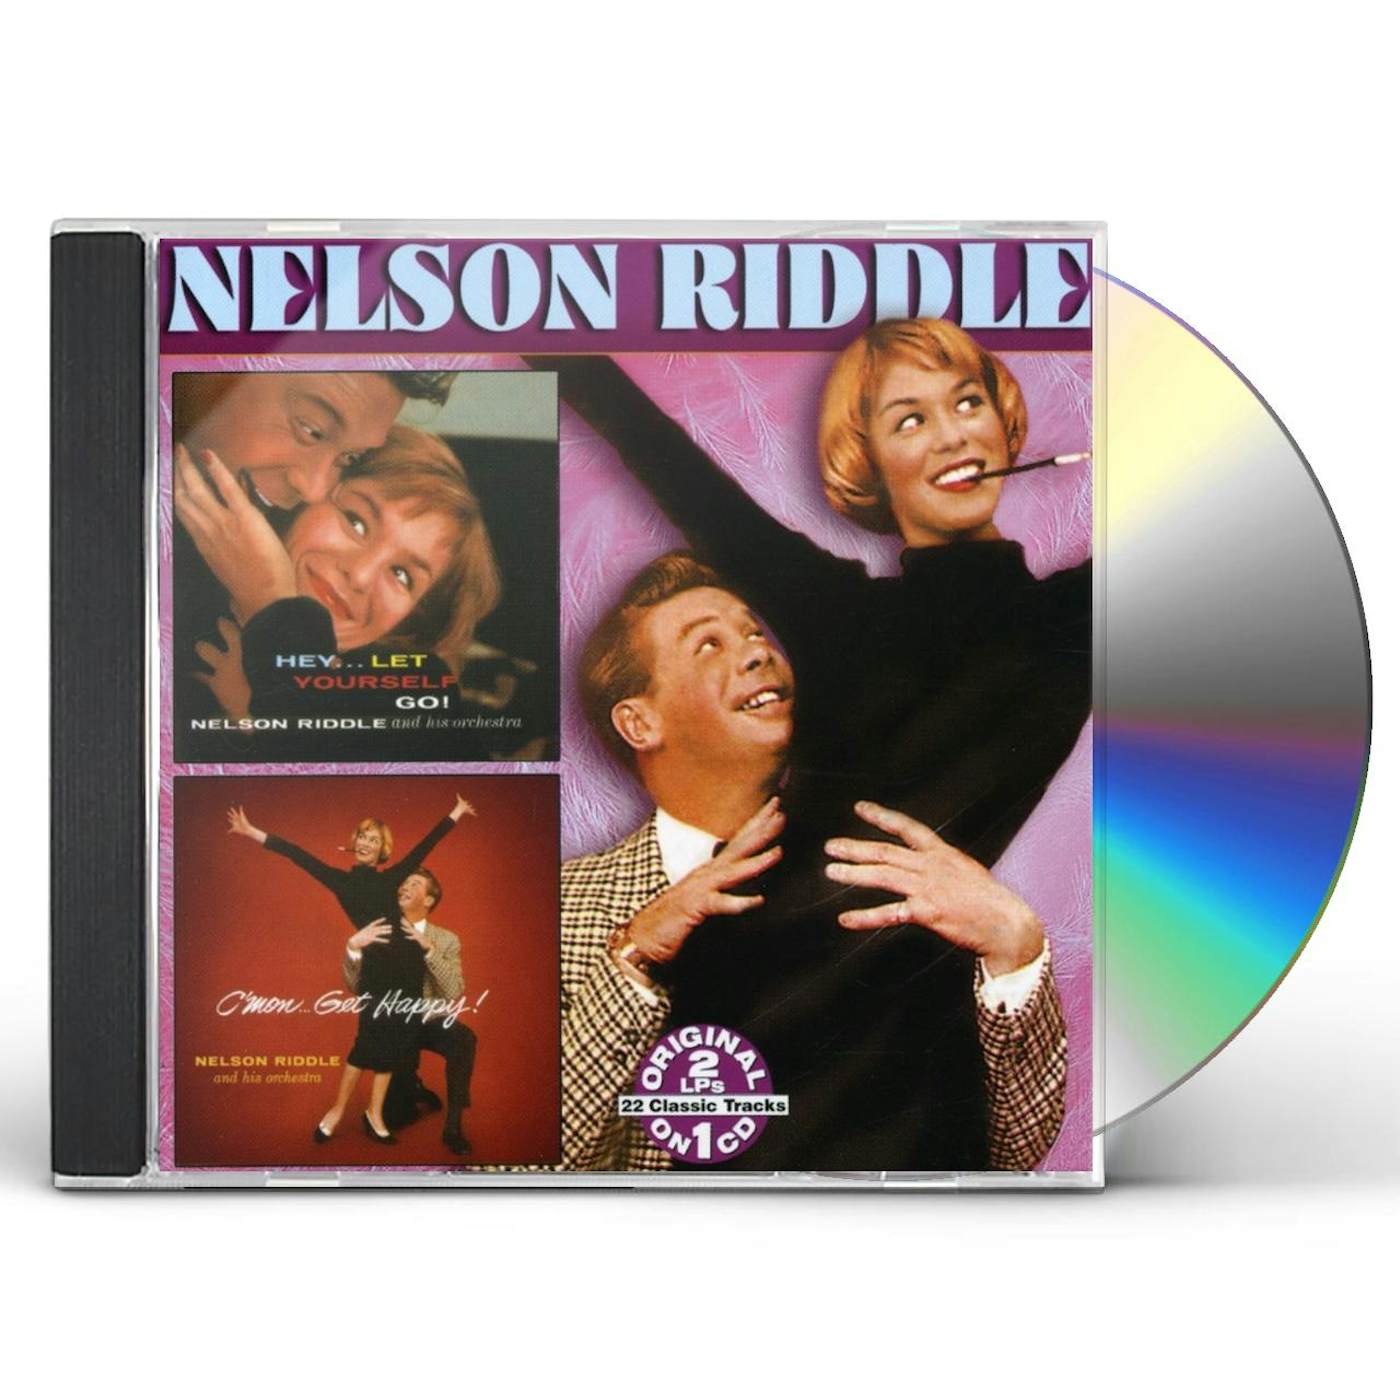 Nelson Riddle HEY LET YOURSELF GO / C MON GET HAPPY CD